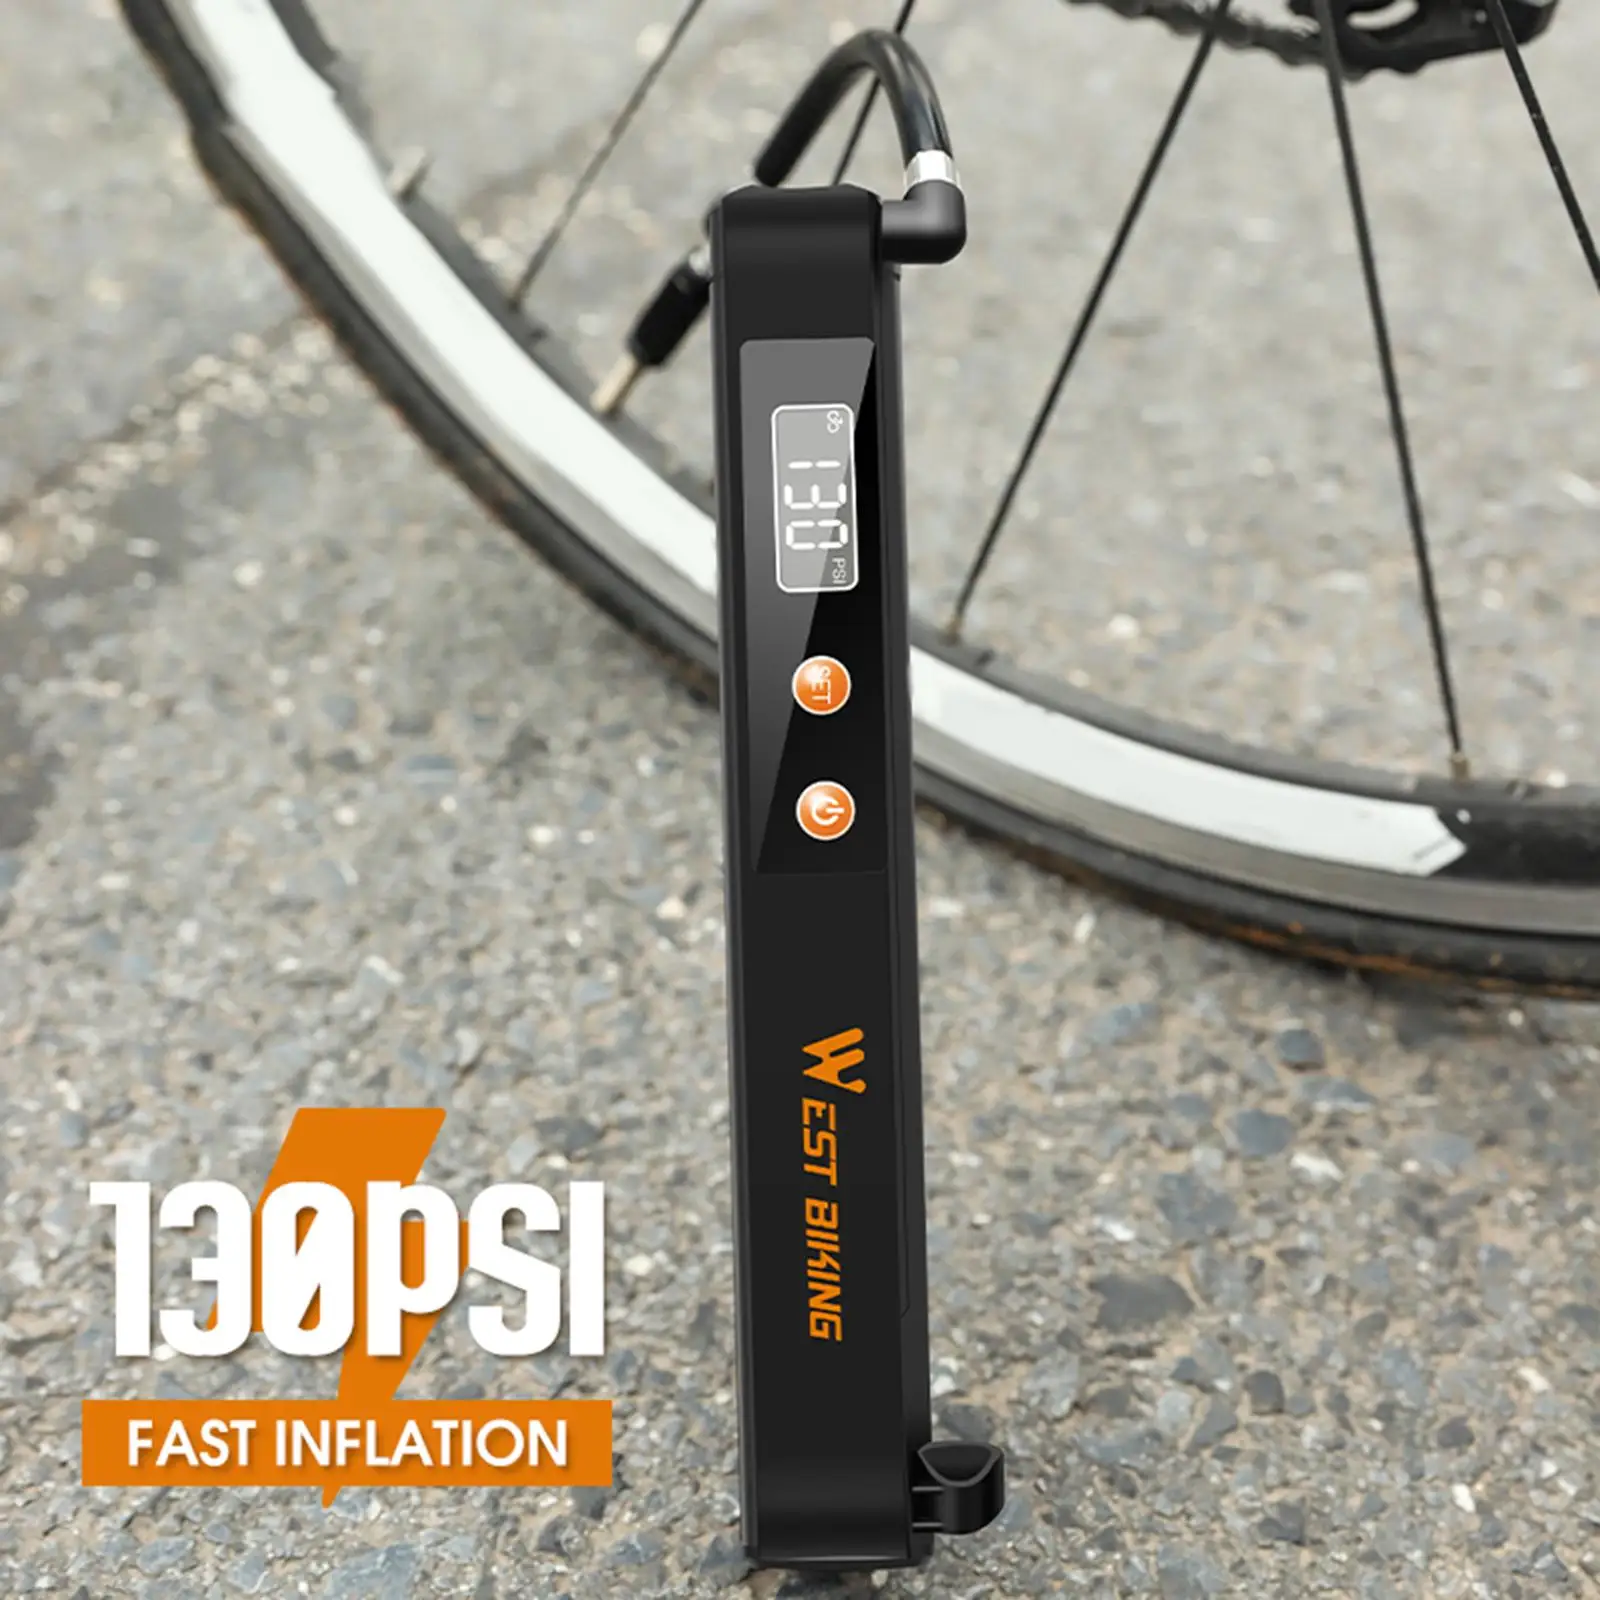 Digital Tyre Inflator Portable 130PSI for Bicycle Vehicle Various Balls Other Inflatables